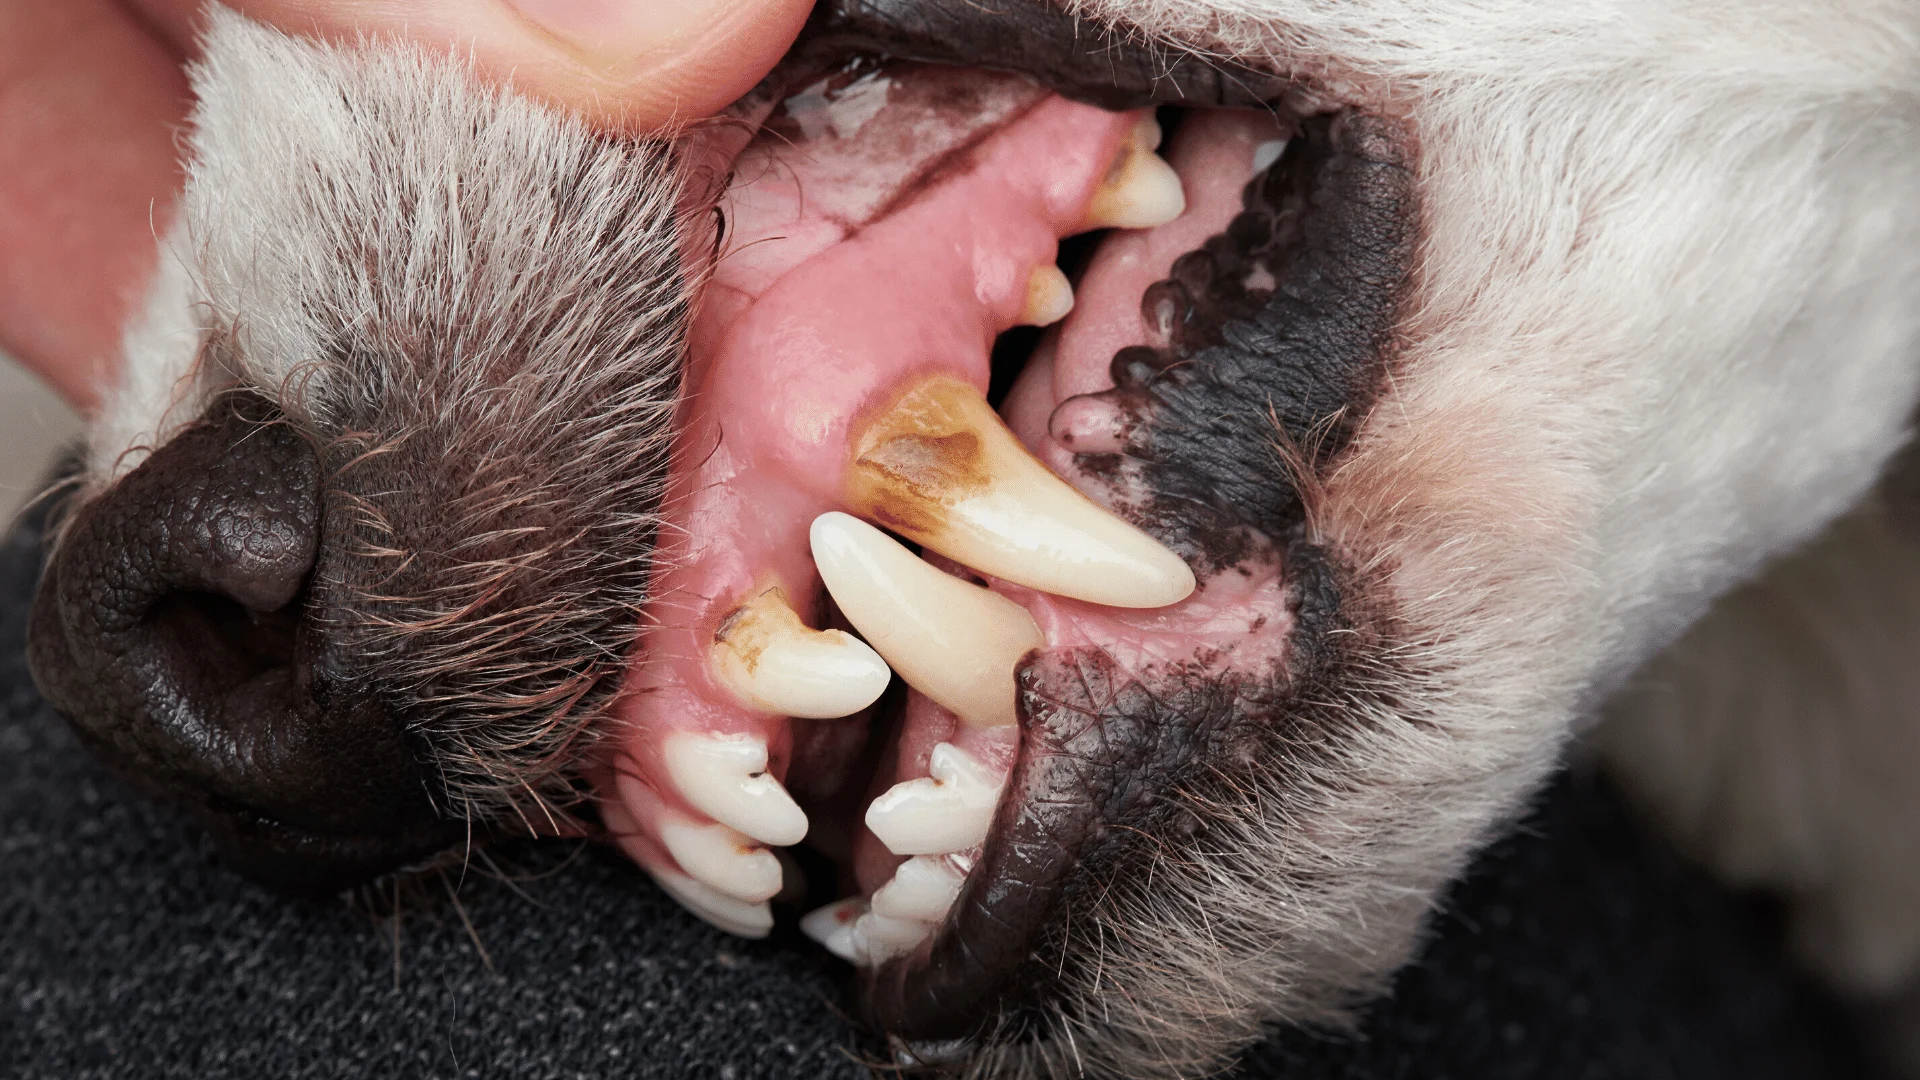 Dog teeth with plaque buildup on them in need of deep teeth cleaning for dogs.